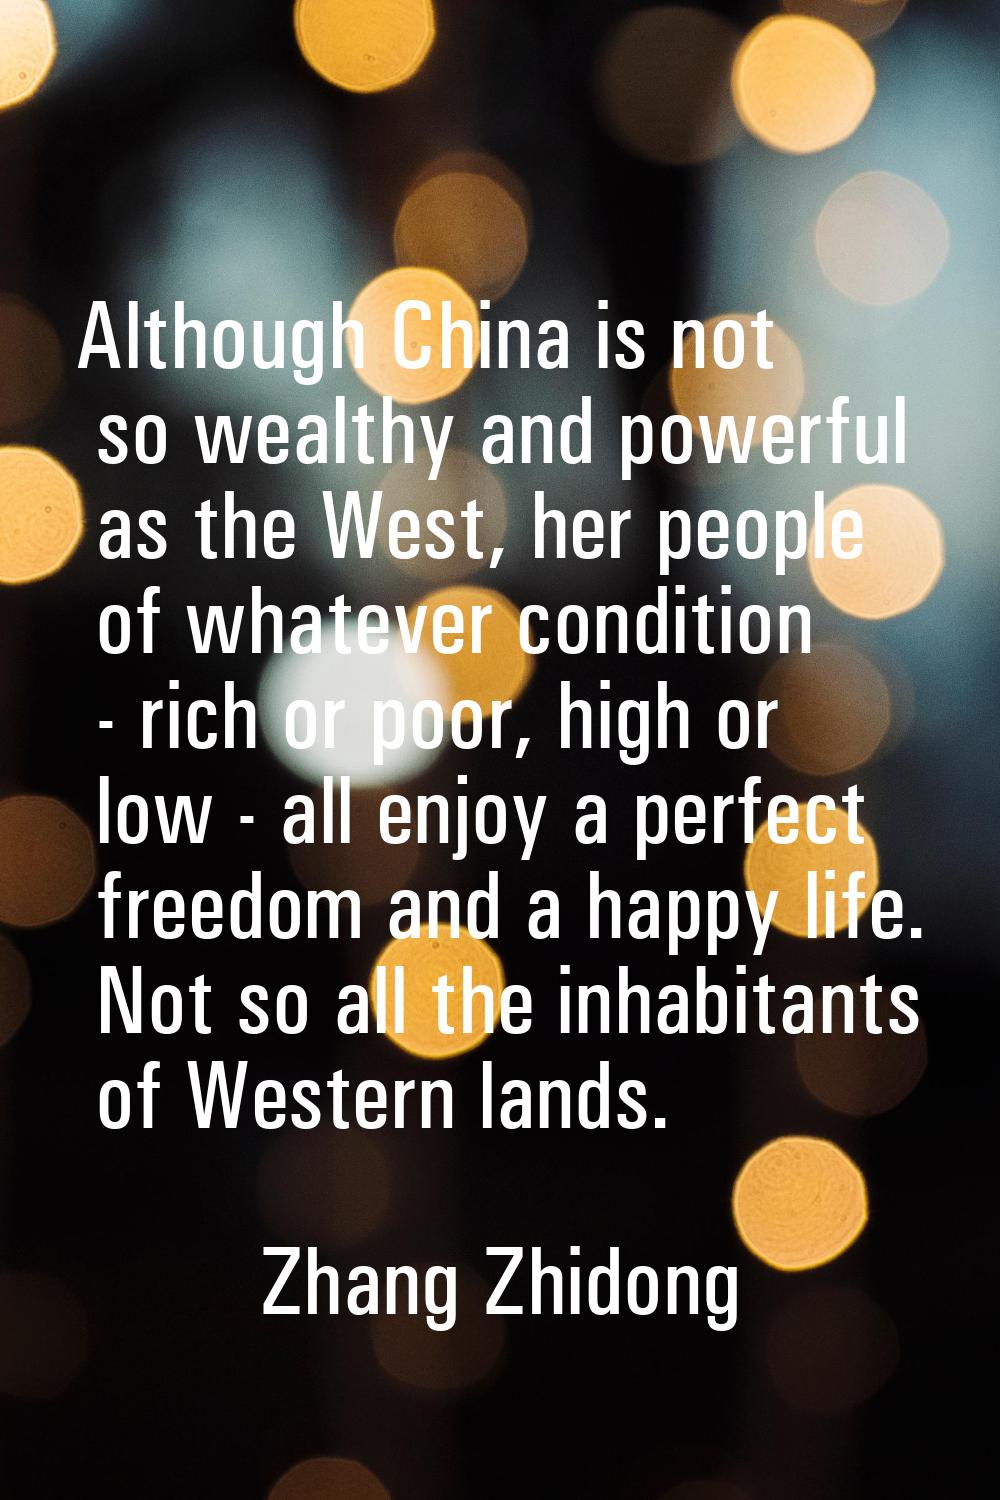 Although China is not so wealthy and powerful as the West, her people of whatever condition - rich 